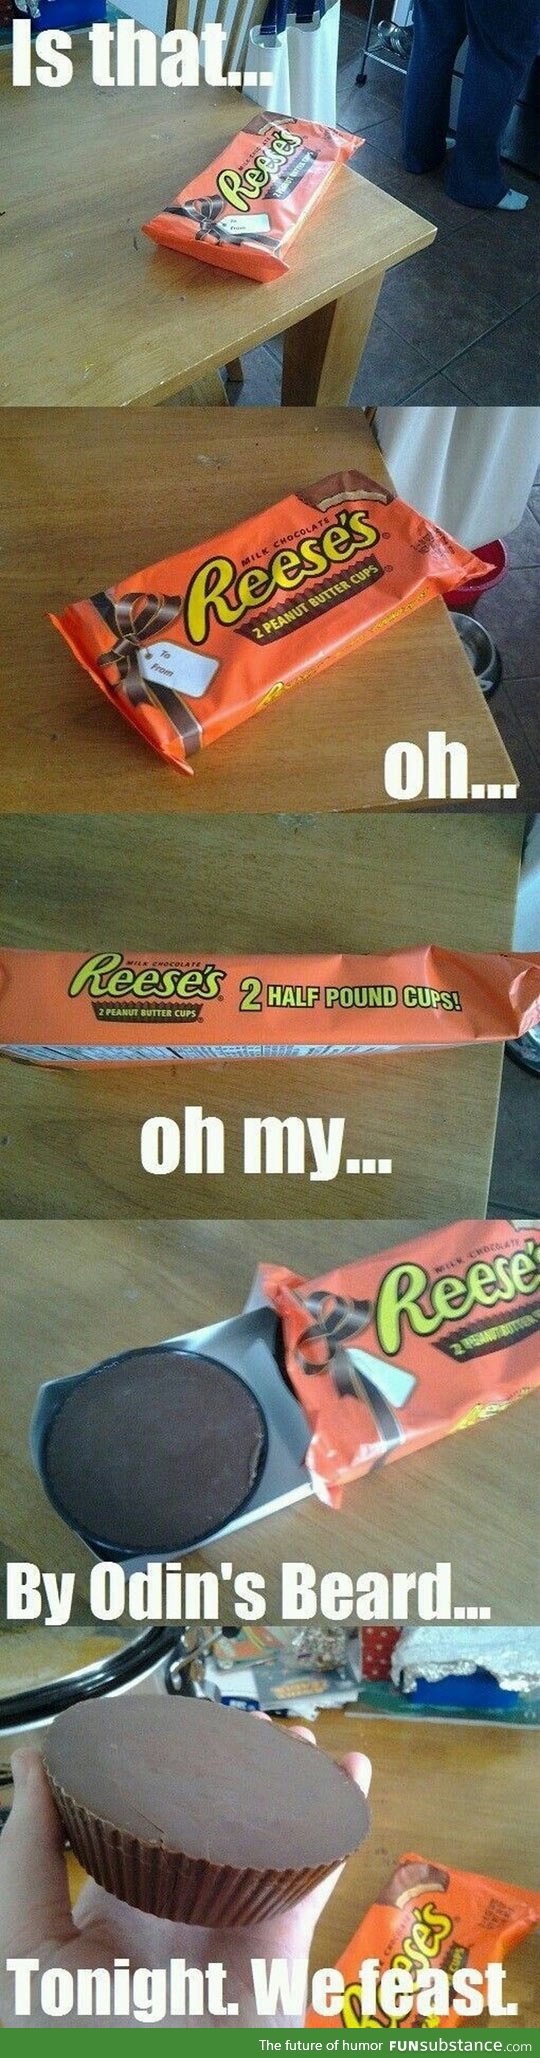 Mother of Reese's...